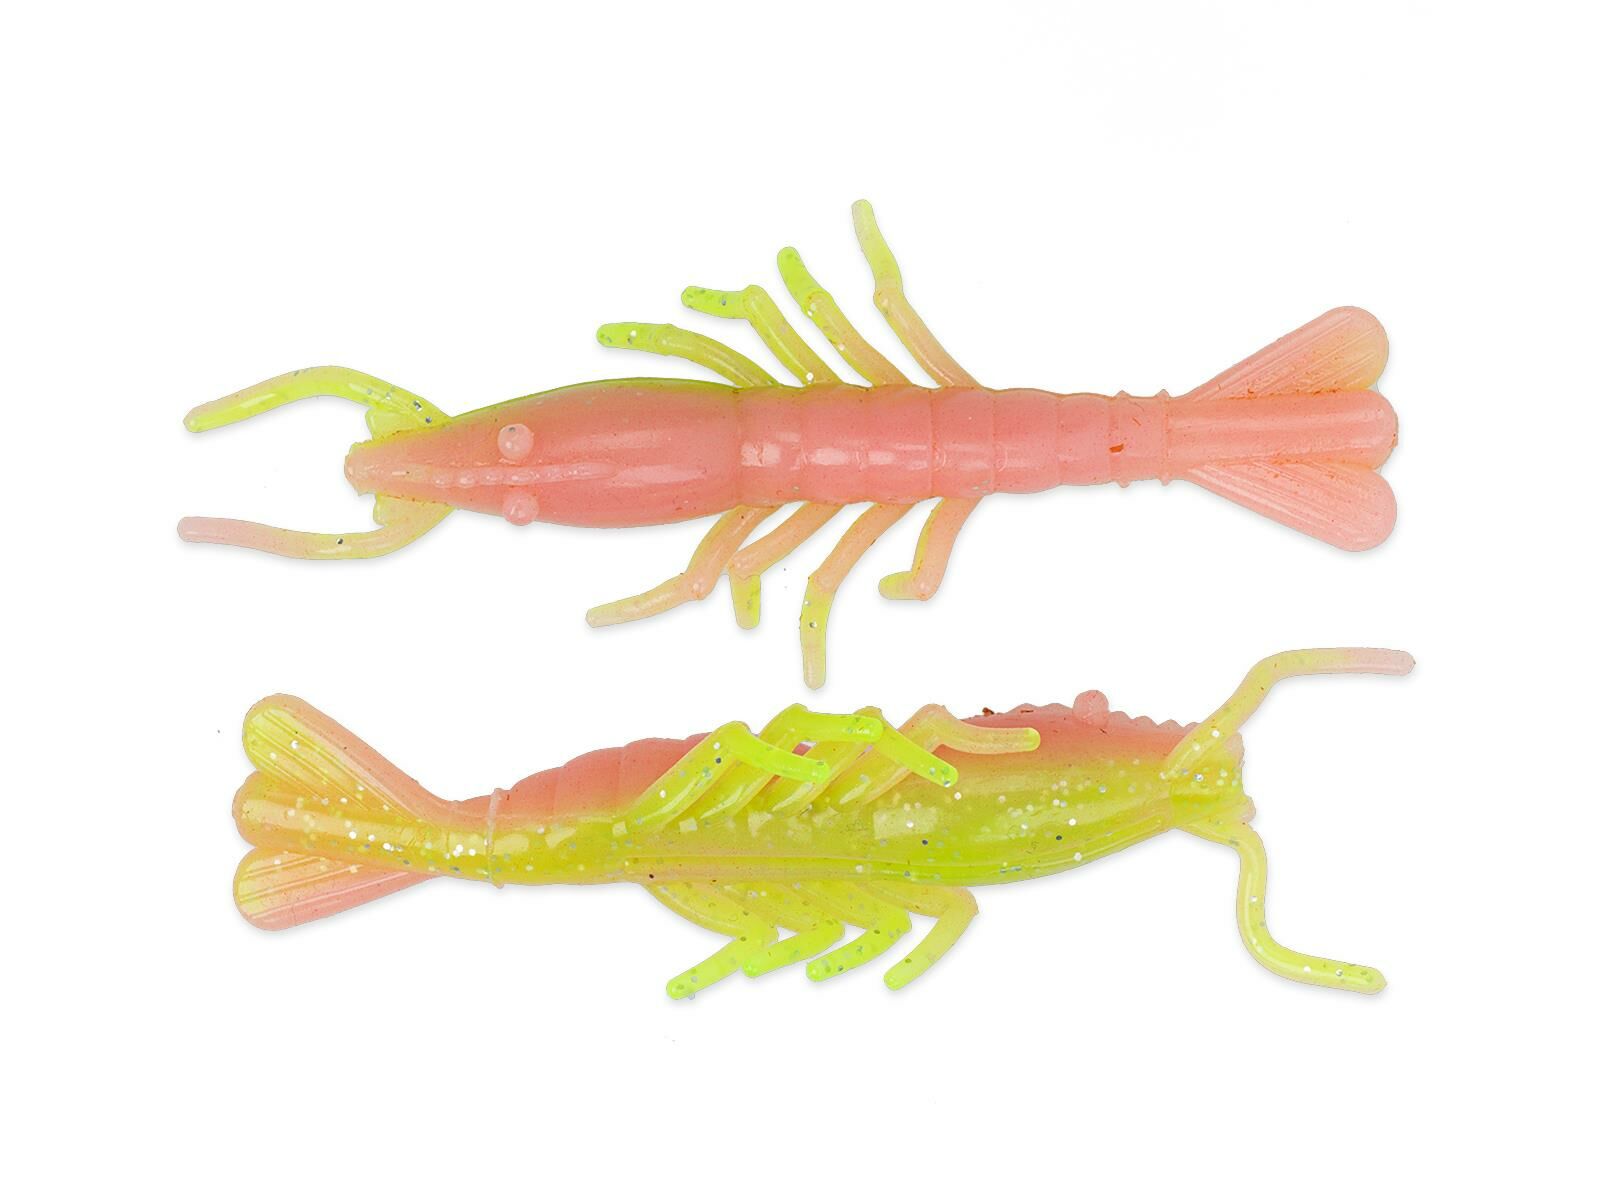 Z-Man Scented ShrimpZ, 3 inch, New Penny